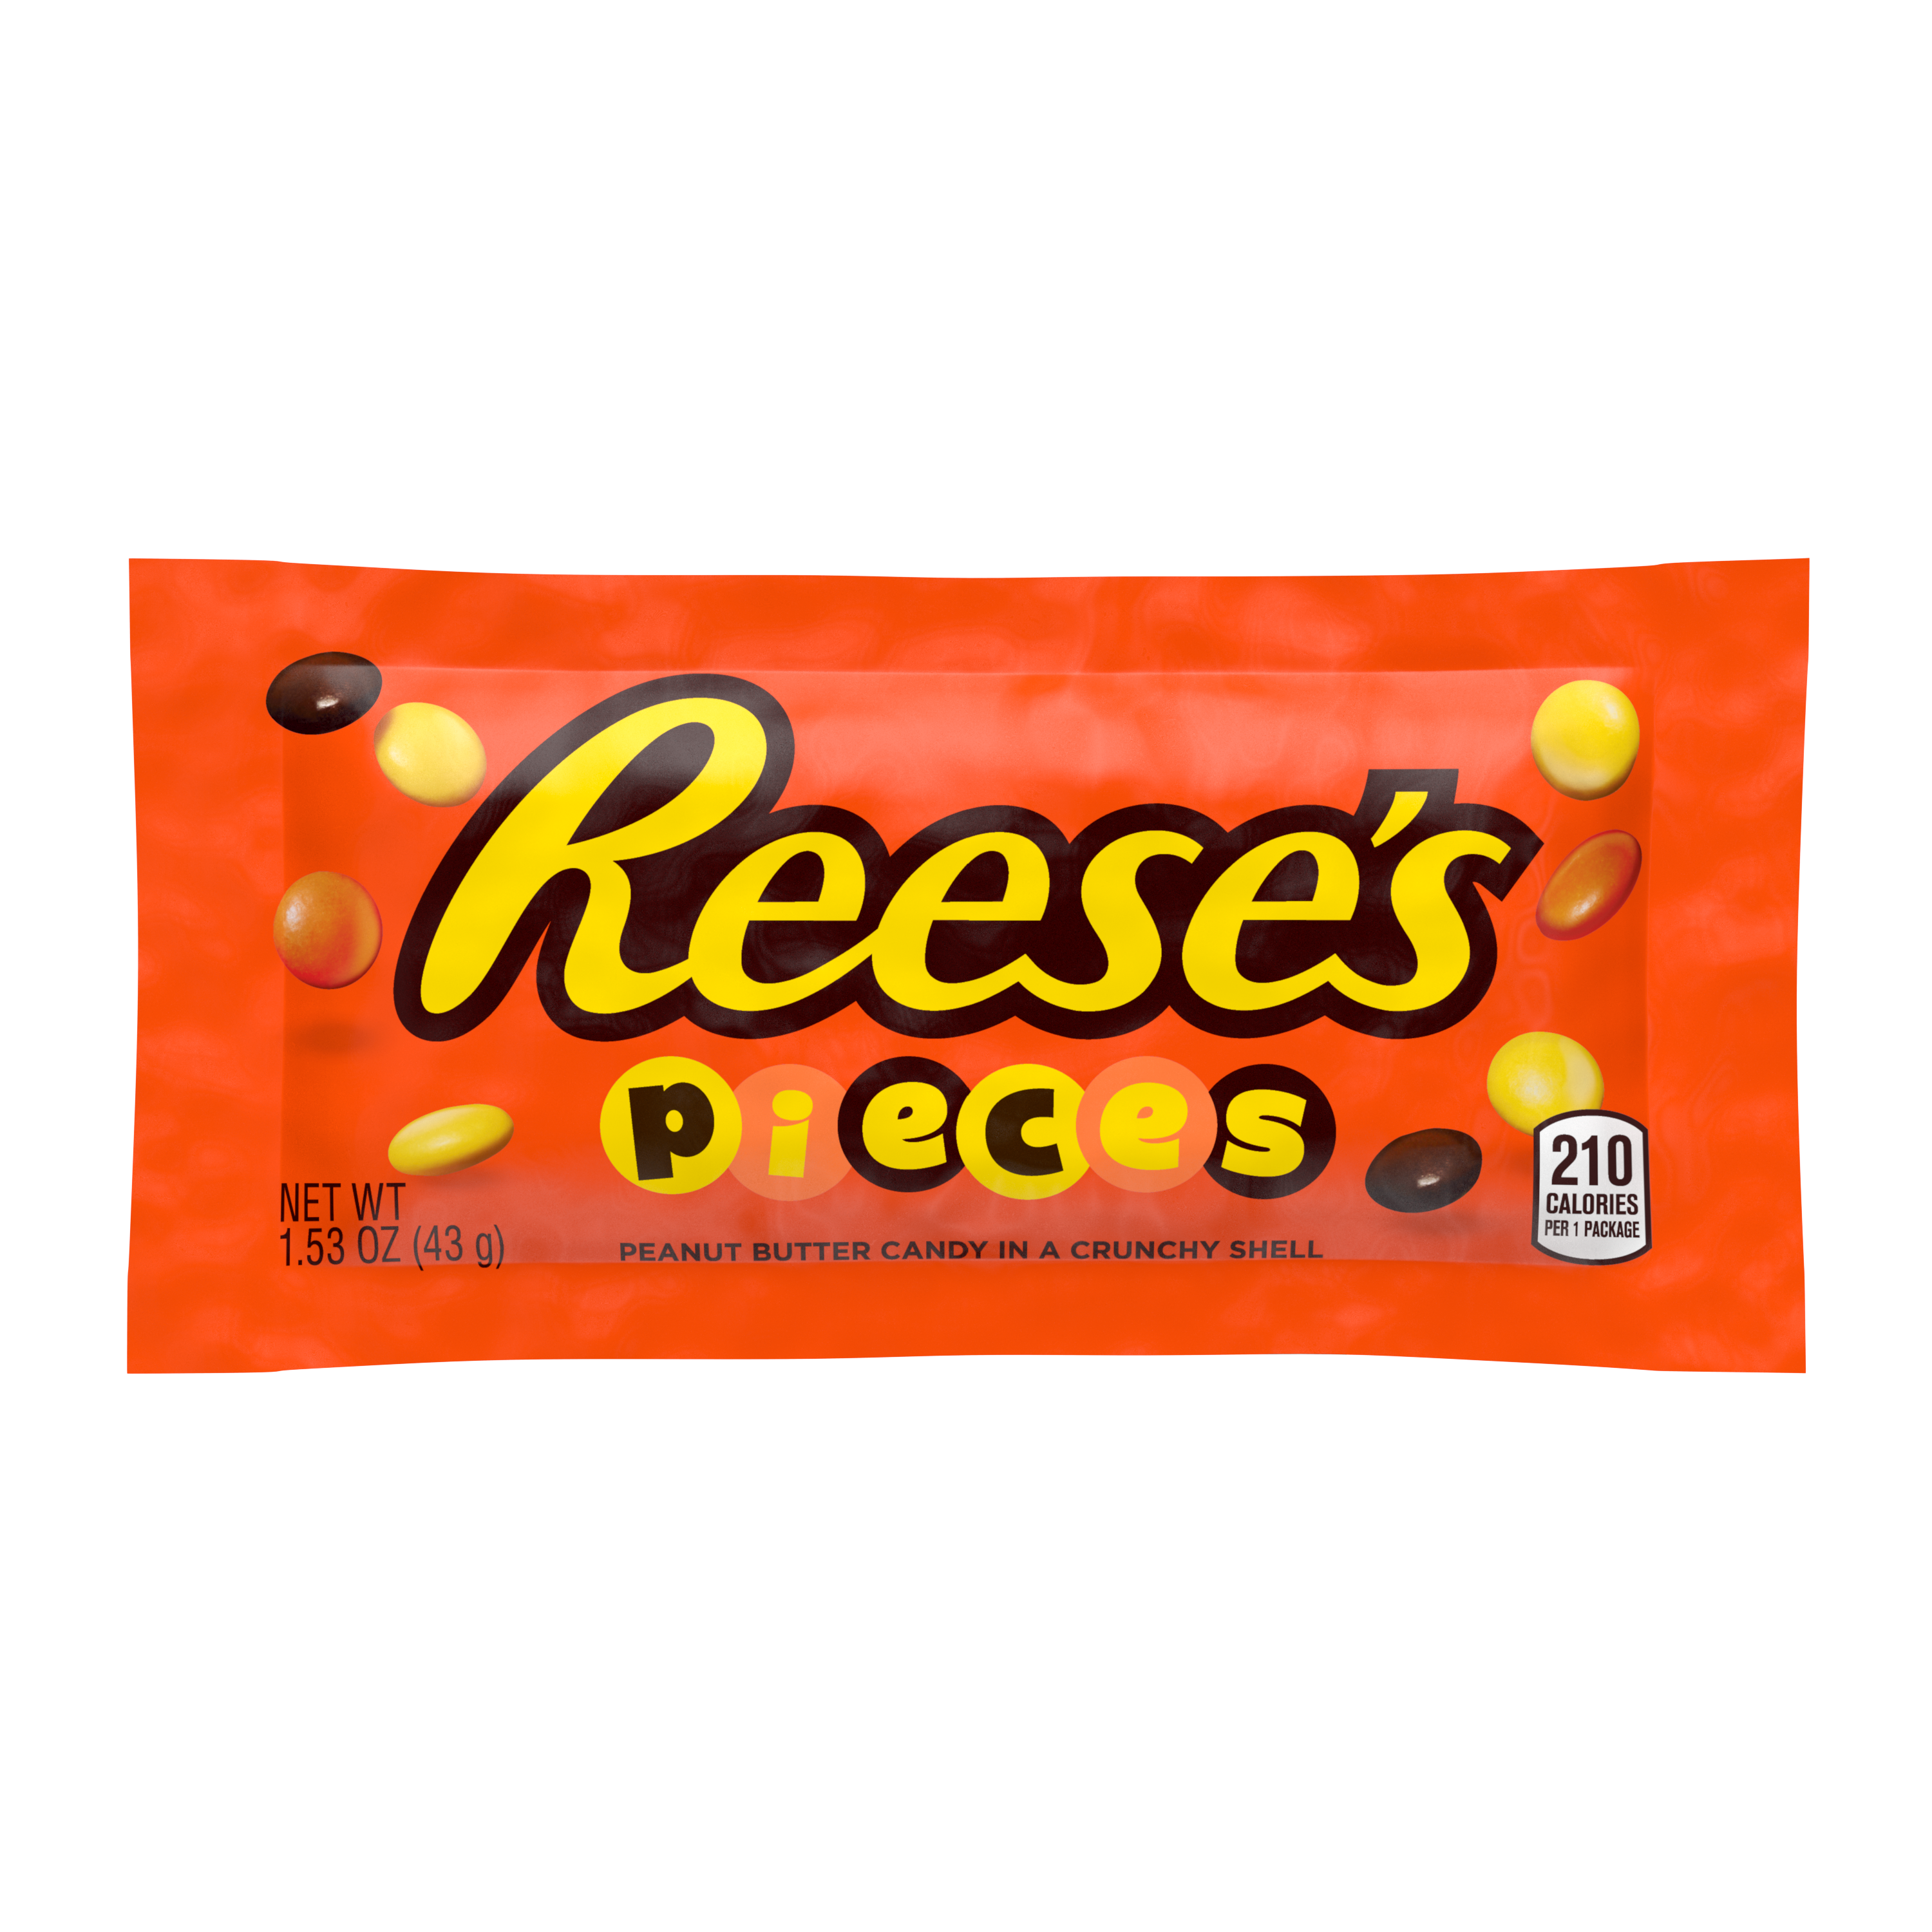 REESE'S PIECES Milk Chocolate Peanut Butter Candy, 1.53 oz - Front of Package